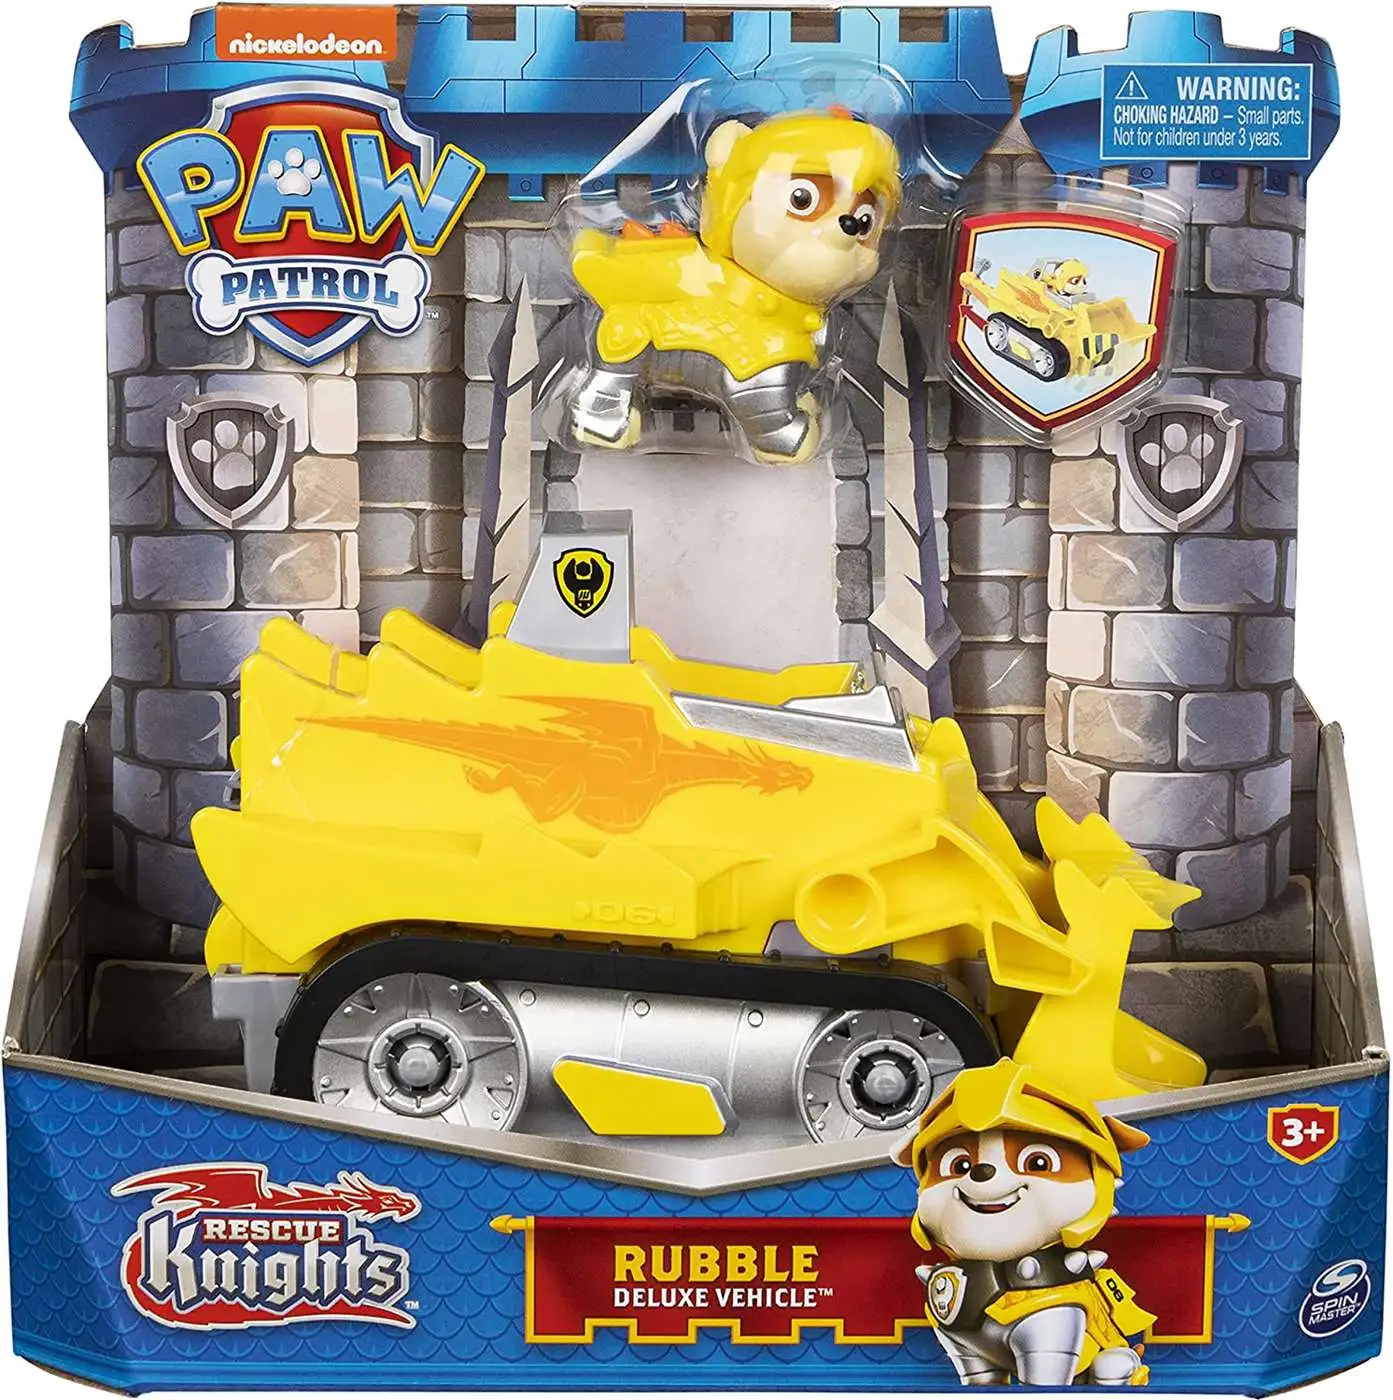 Patrol Rescue Knights Rubble Deluxe Vehicle Figure Spin Master